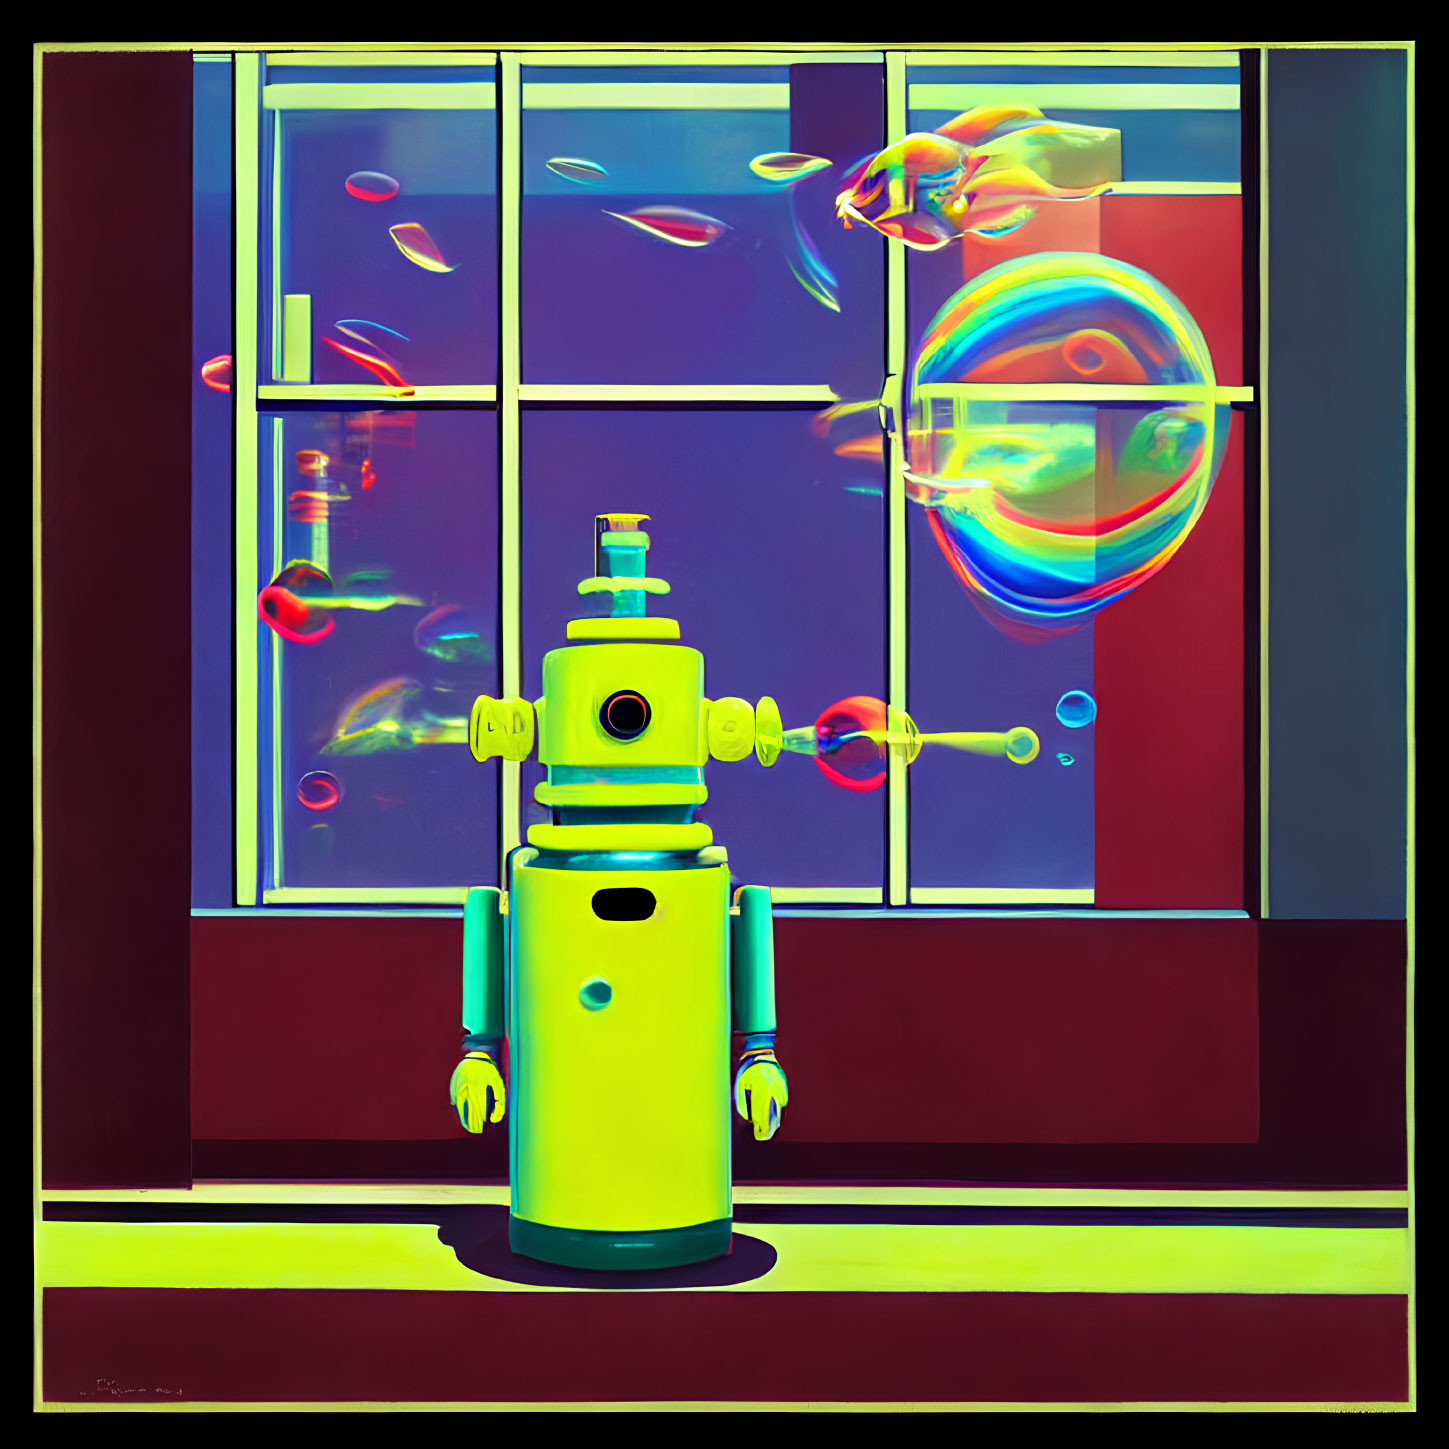 Colorful retro-style robot illustration with bubbles and vibrant colors